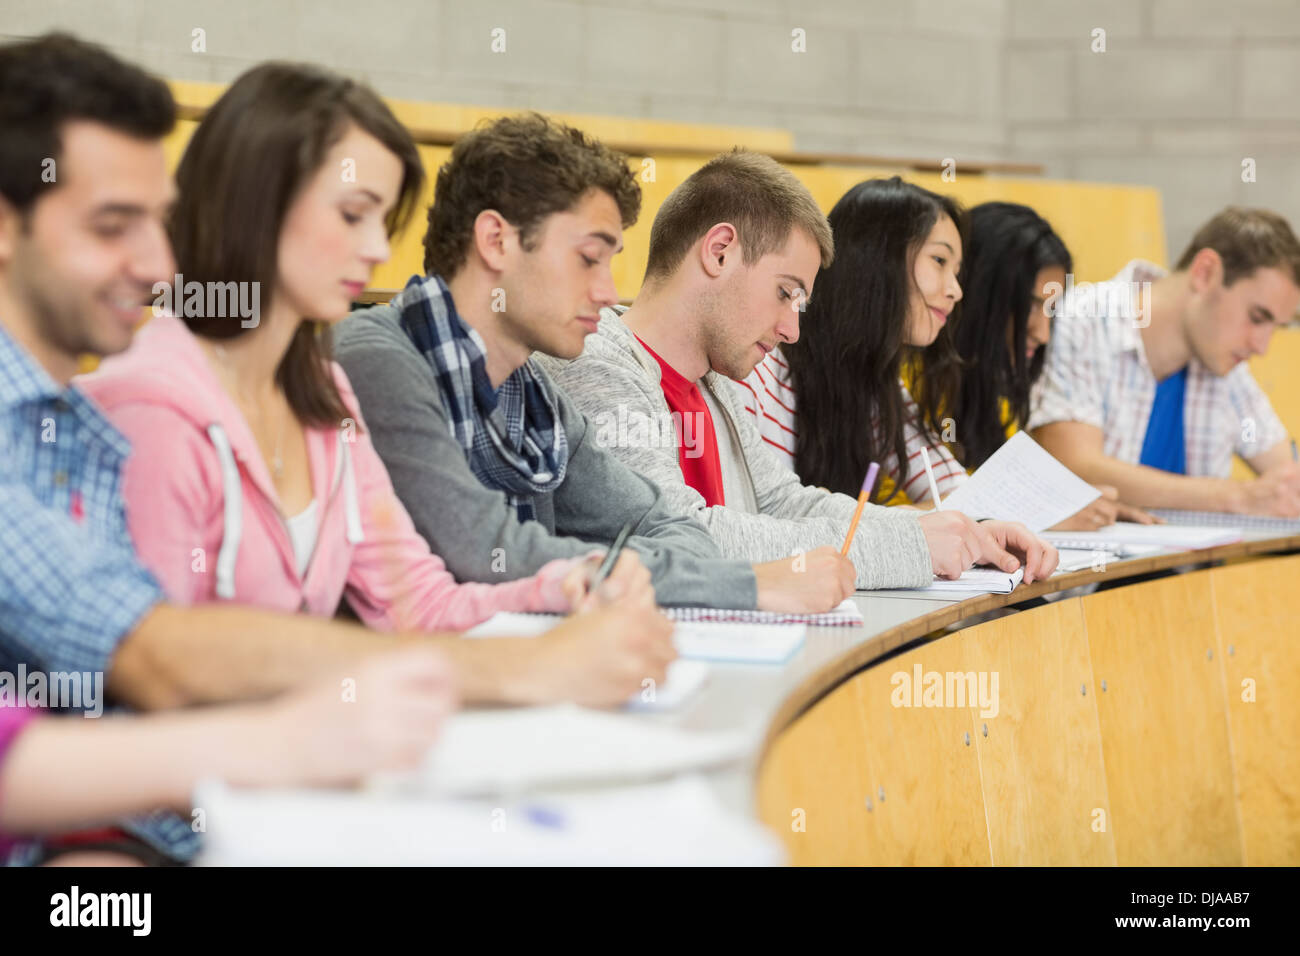 Students writing notes in a row at the lecture hall Stock Photo